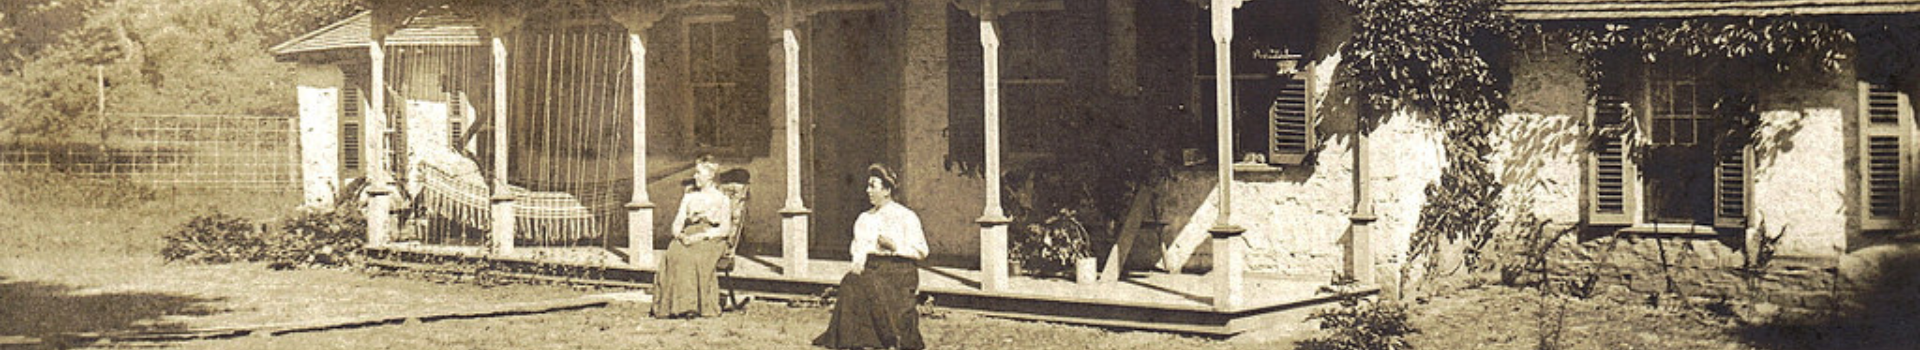 Residents on porch in 1800s